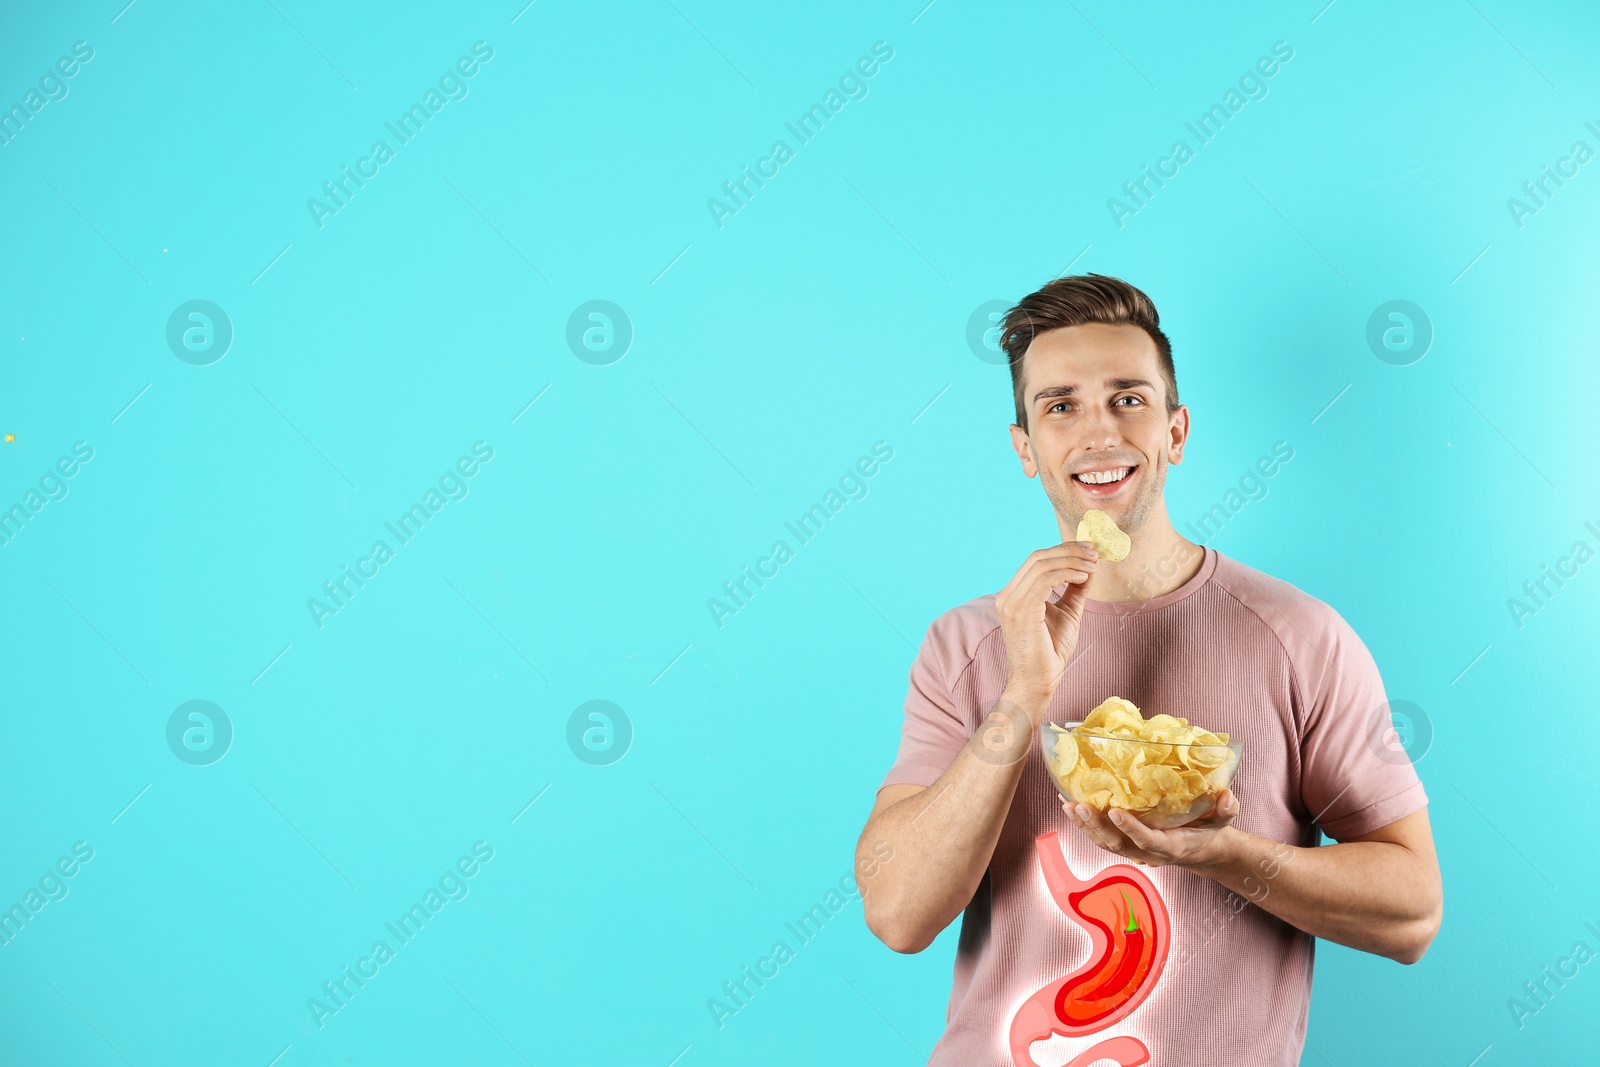 Image of Improper nutrition can lead to heartburn or other gastrointestinal problems. Man eating potato chips on light blue background, space for text. Illustration of stomach with hot chili pepper as acid indigestion